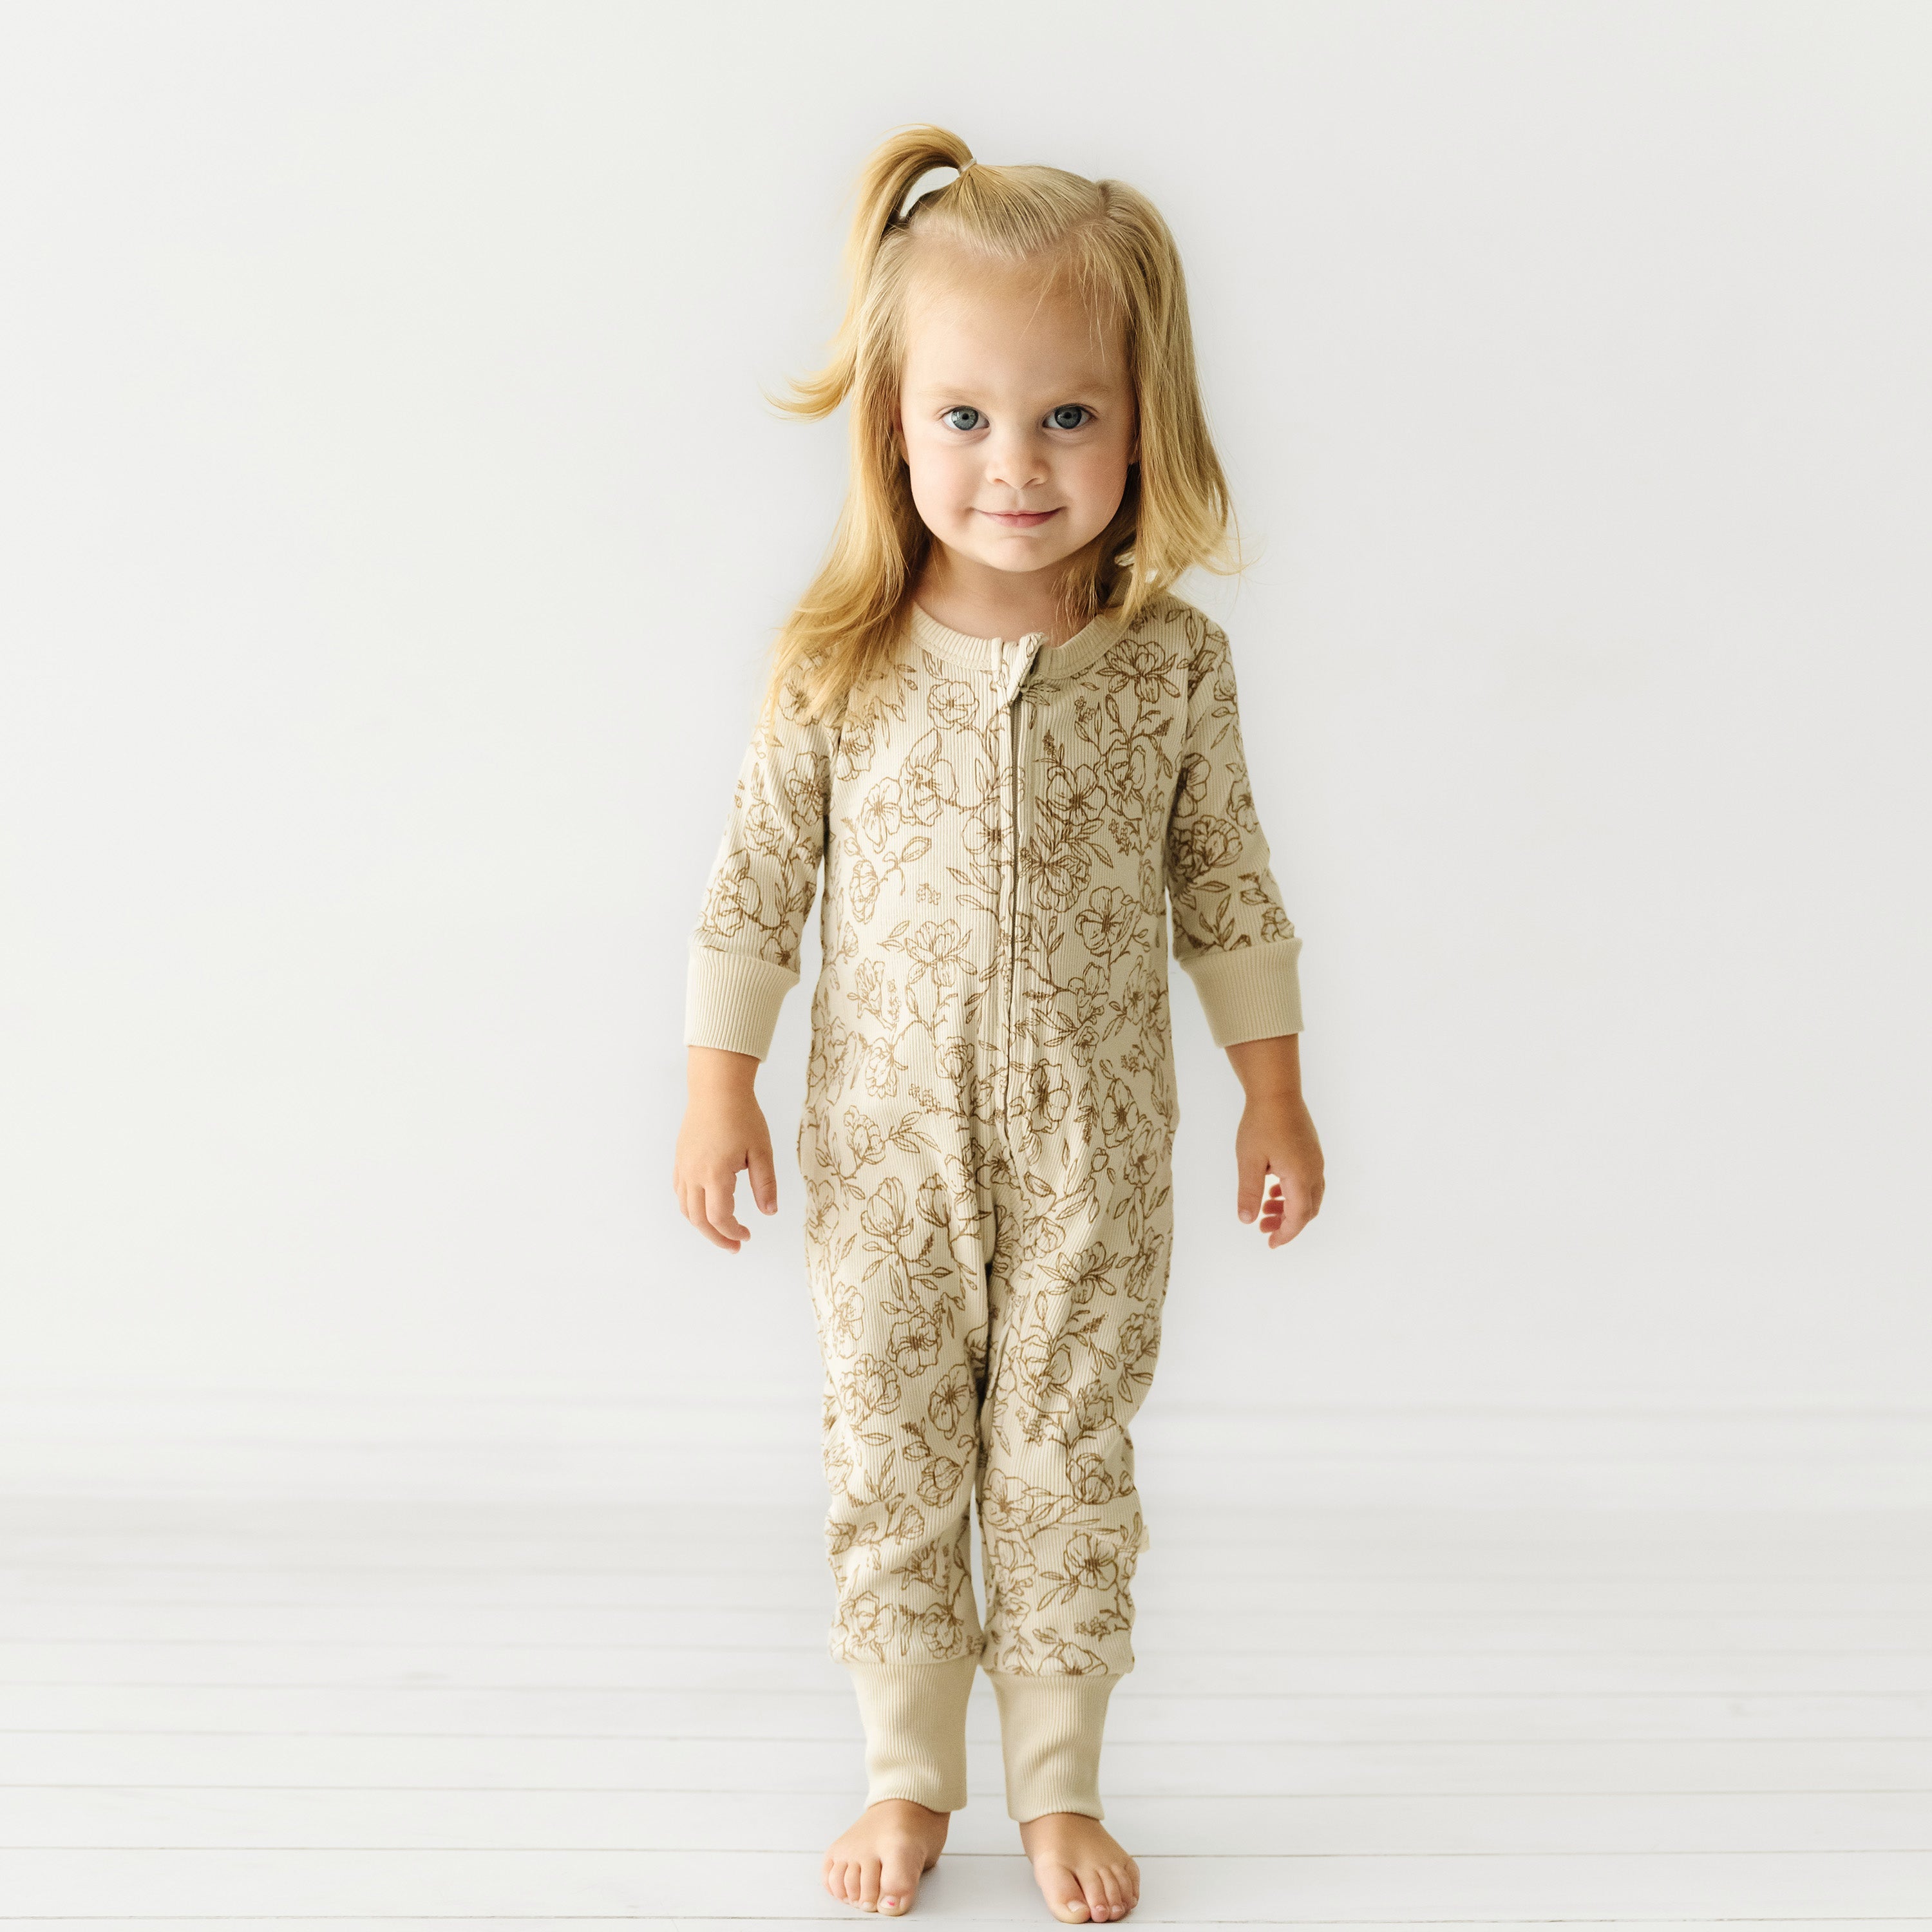 A toddler with light hair styled in a ponytail stands smiling in an Organic 2-Way Zip Romper - Vintage Bloom by Organic Baby against a white background.